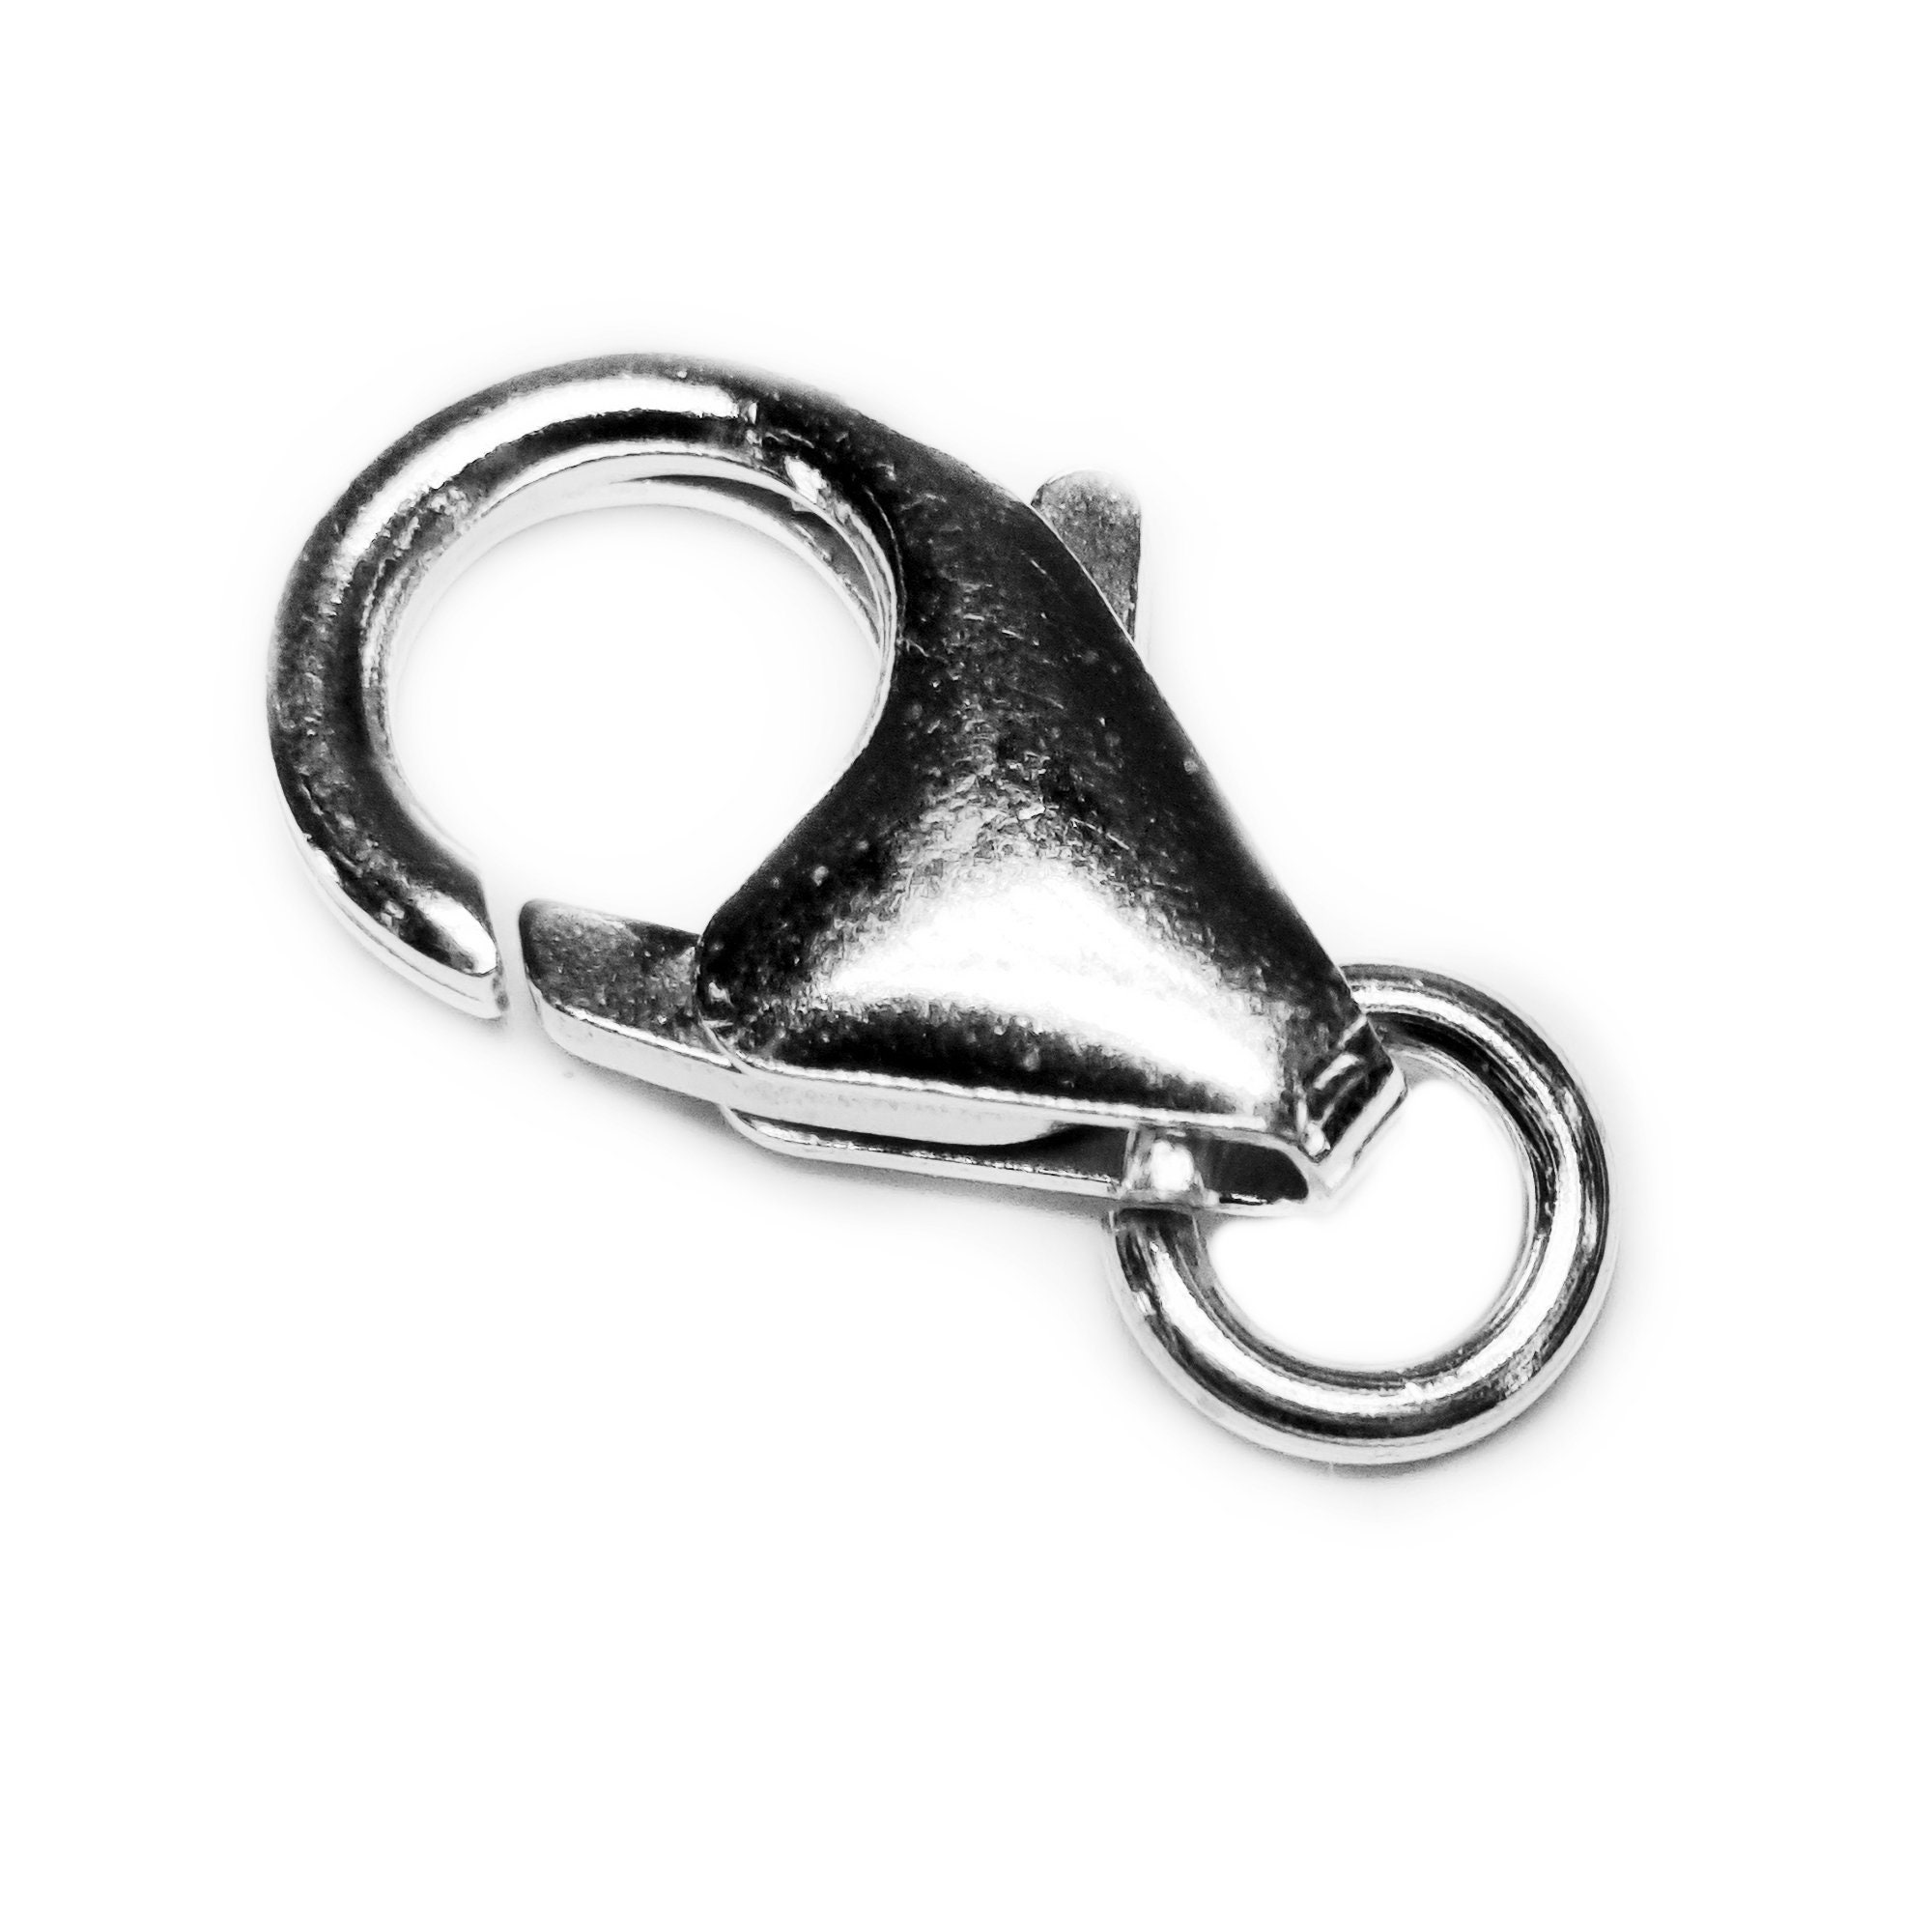 5 Pcs Sterling Silver Lobster Clasp, Lobster Claw Clasp, Jewelry Findings  for DIY Jewelry Making, Wholesale Bulk Silver Findings, 8x5.5mm 